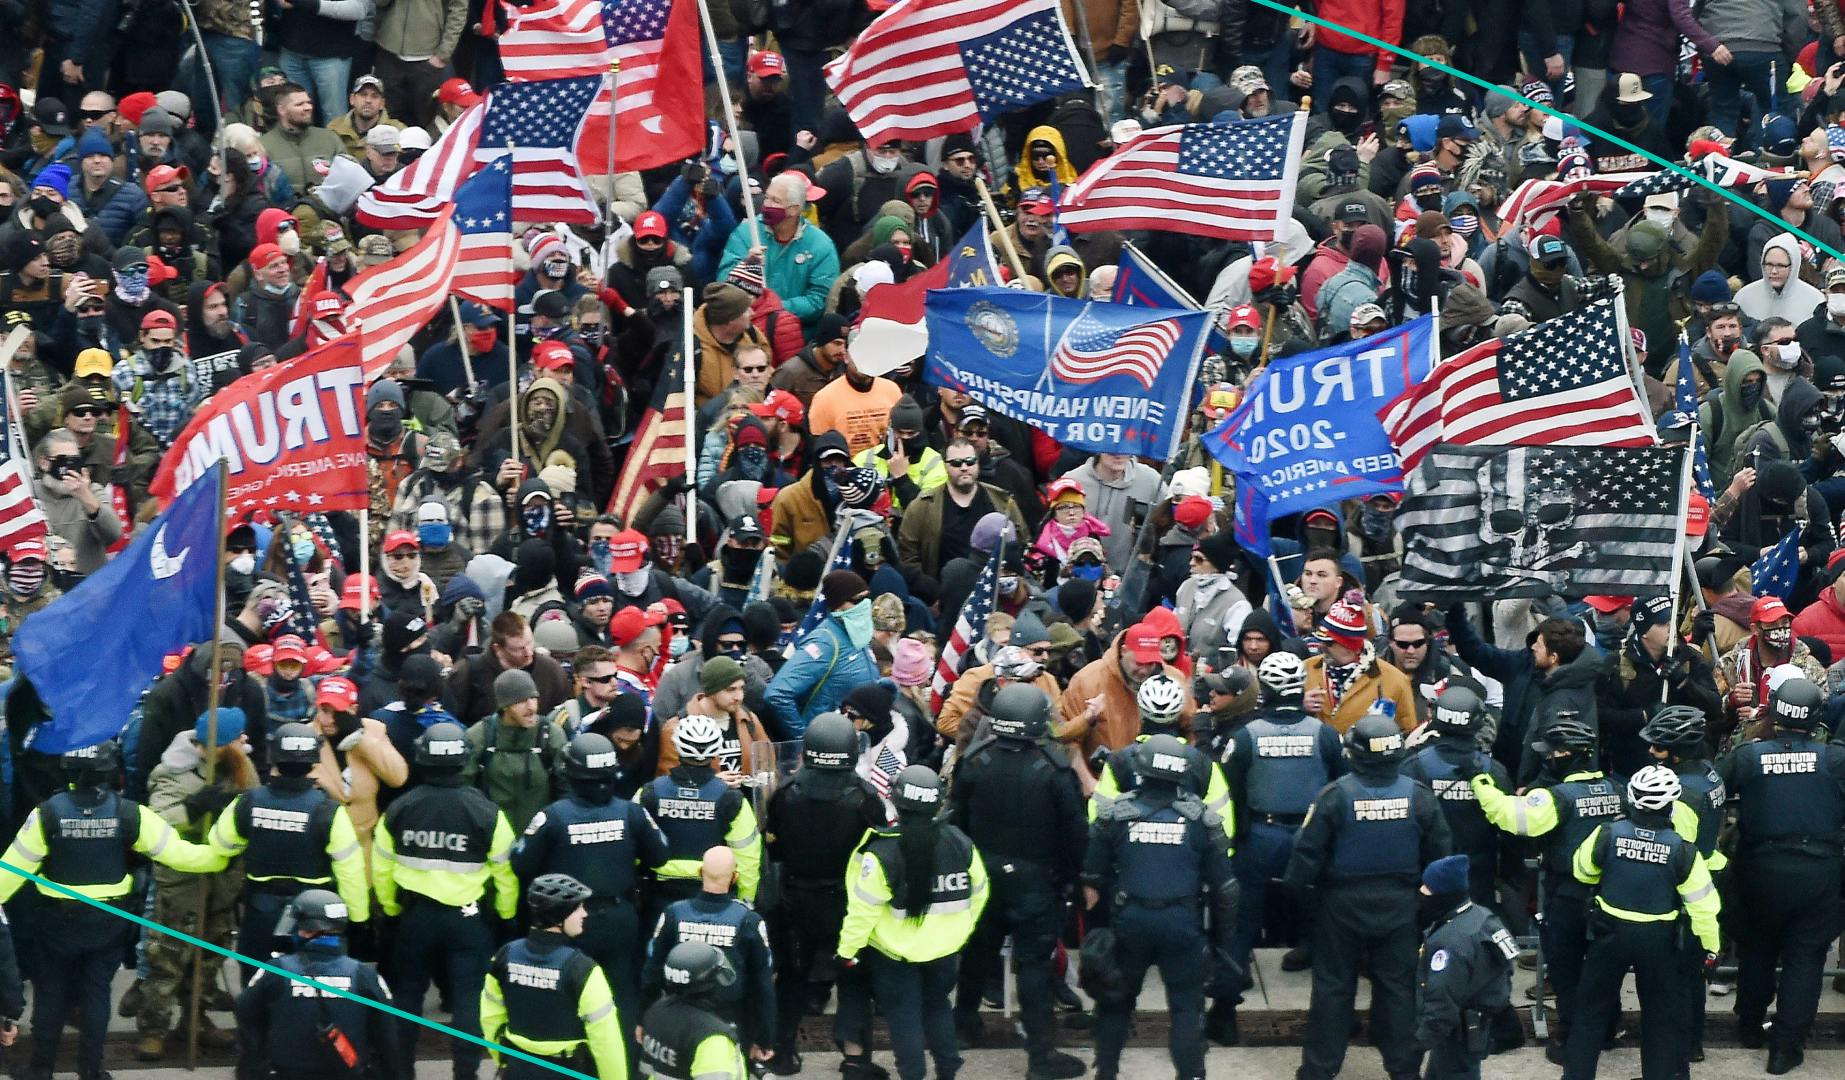 A mob of pro-Trump supporters clash with police as they storm the US Capitol in Washington, DC on January 6, 2021.